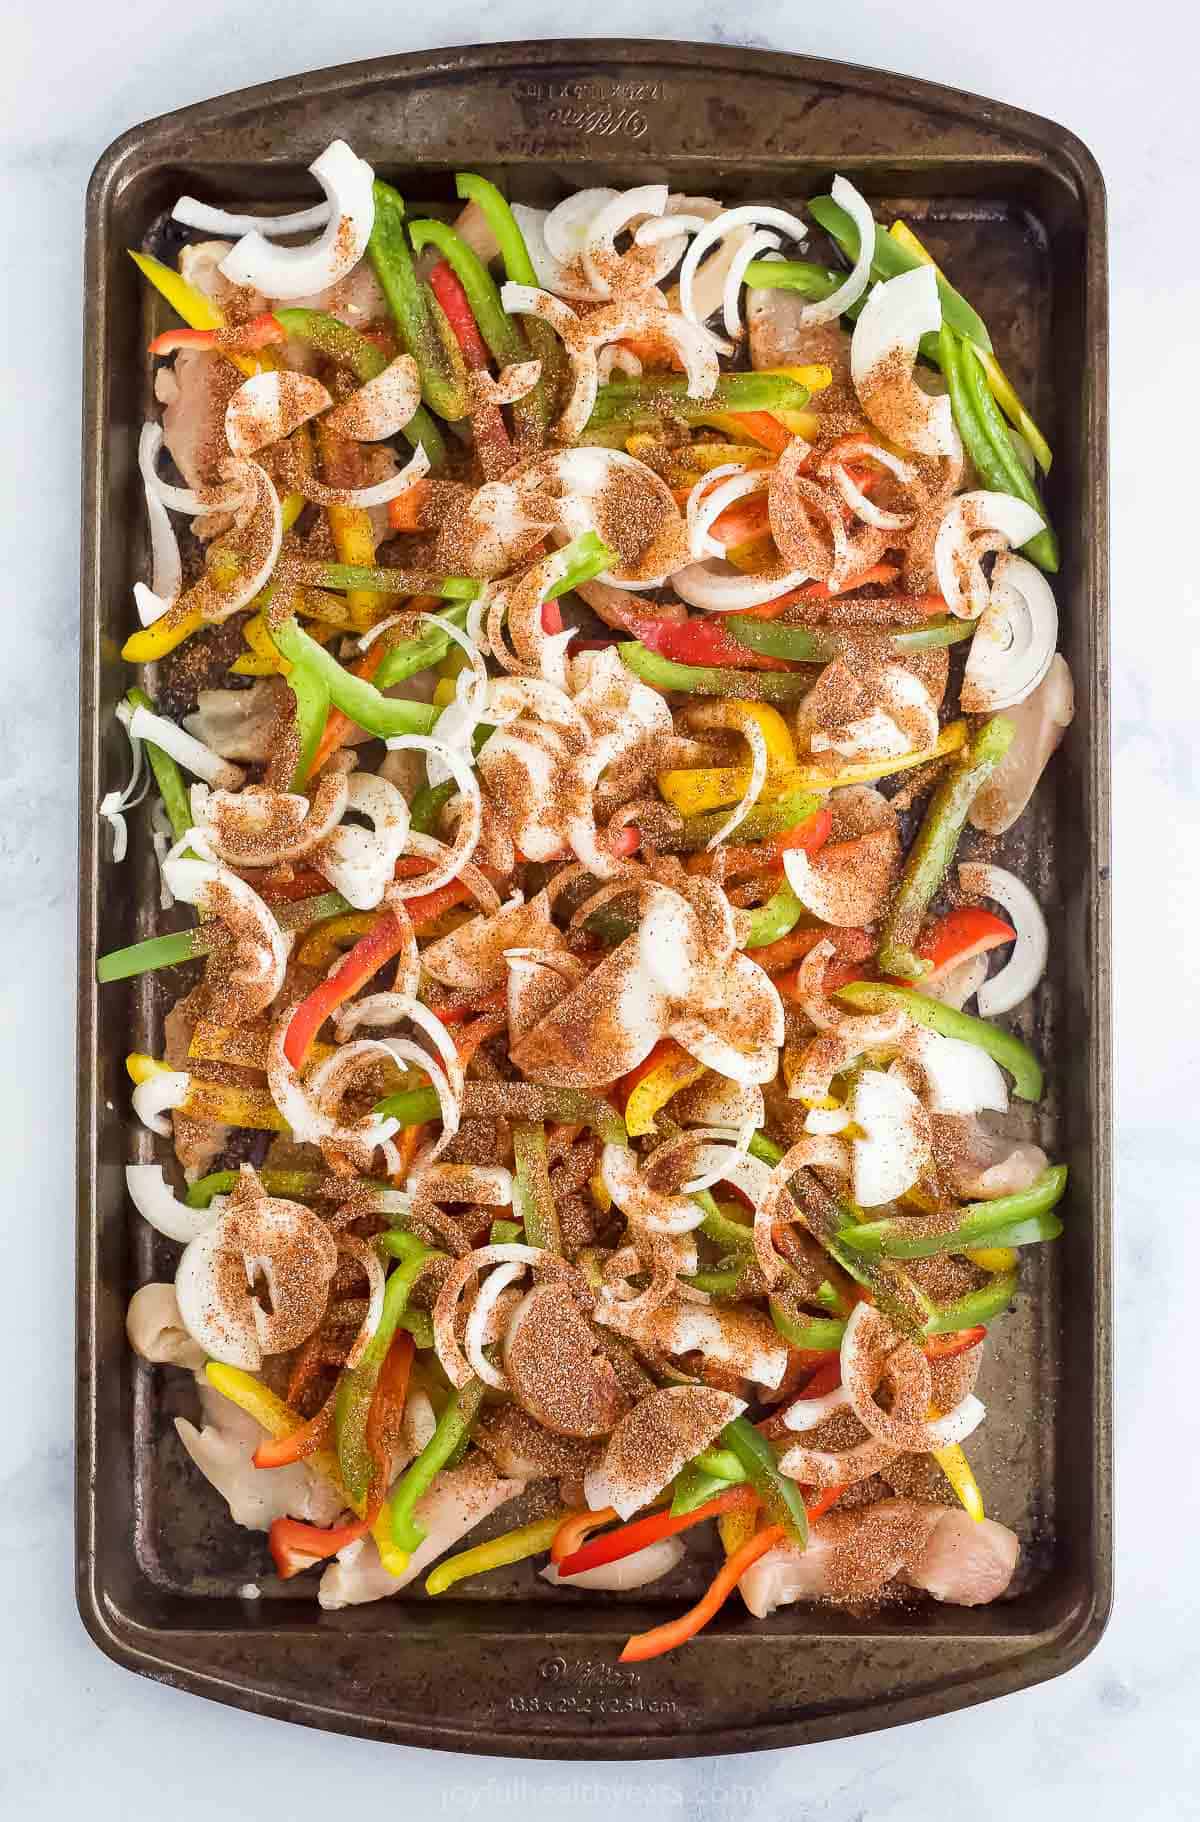 Peppers, onions, and chicken breast slices mixed with fajita seasoning on a baking sheet